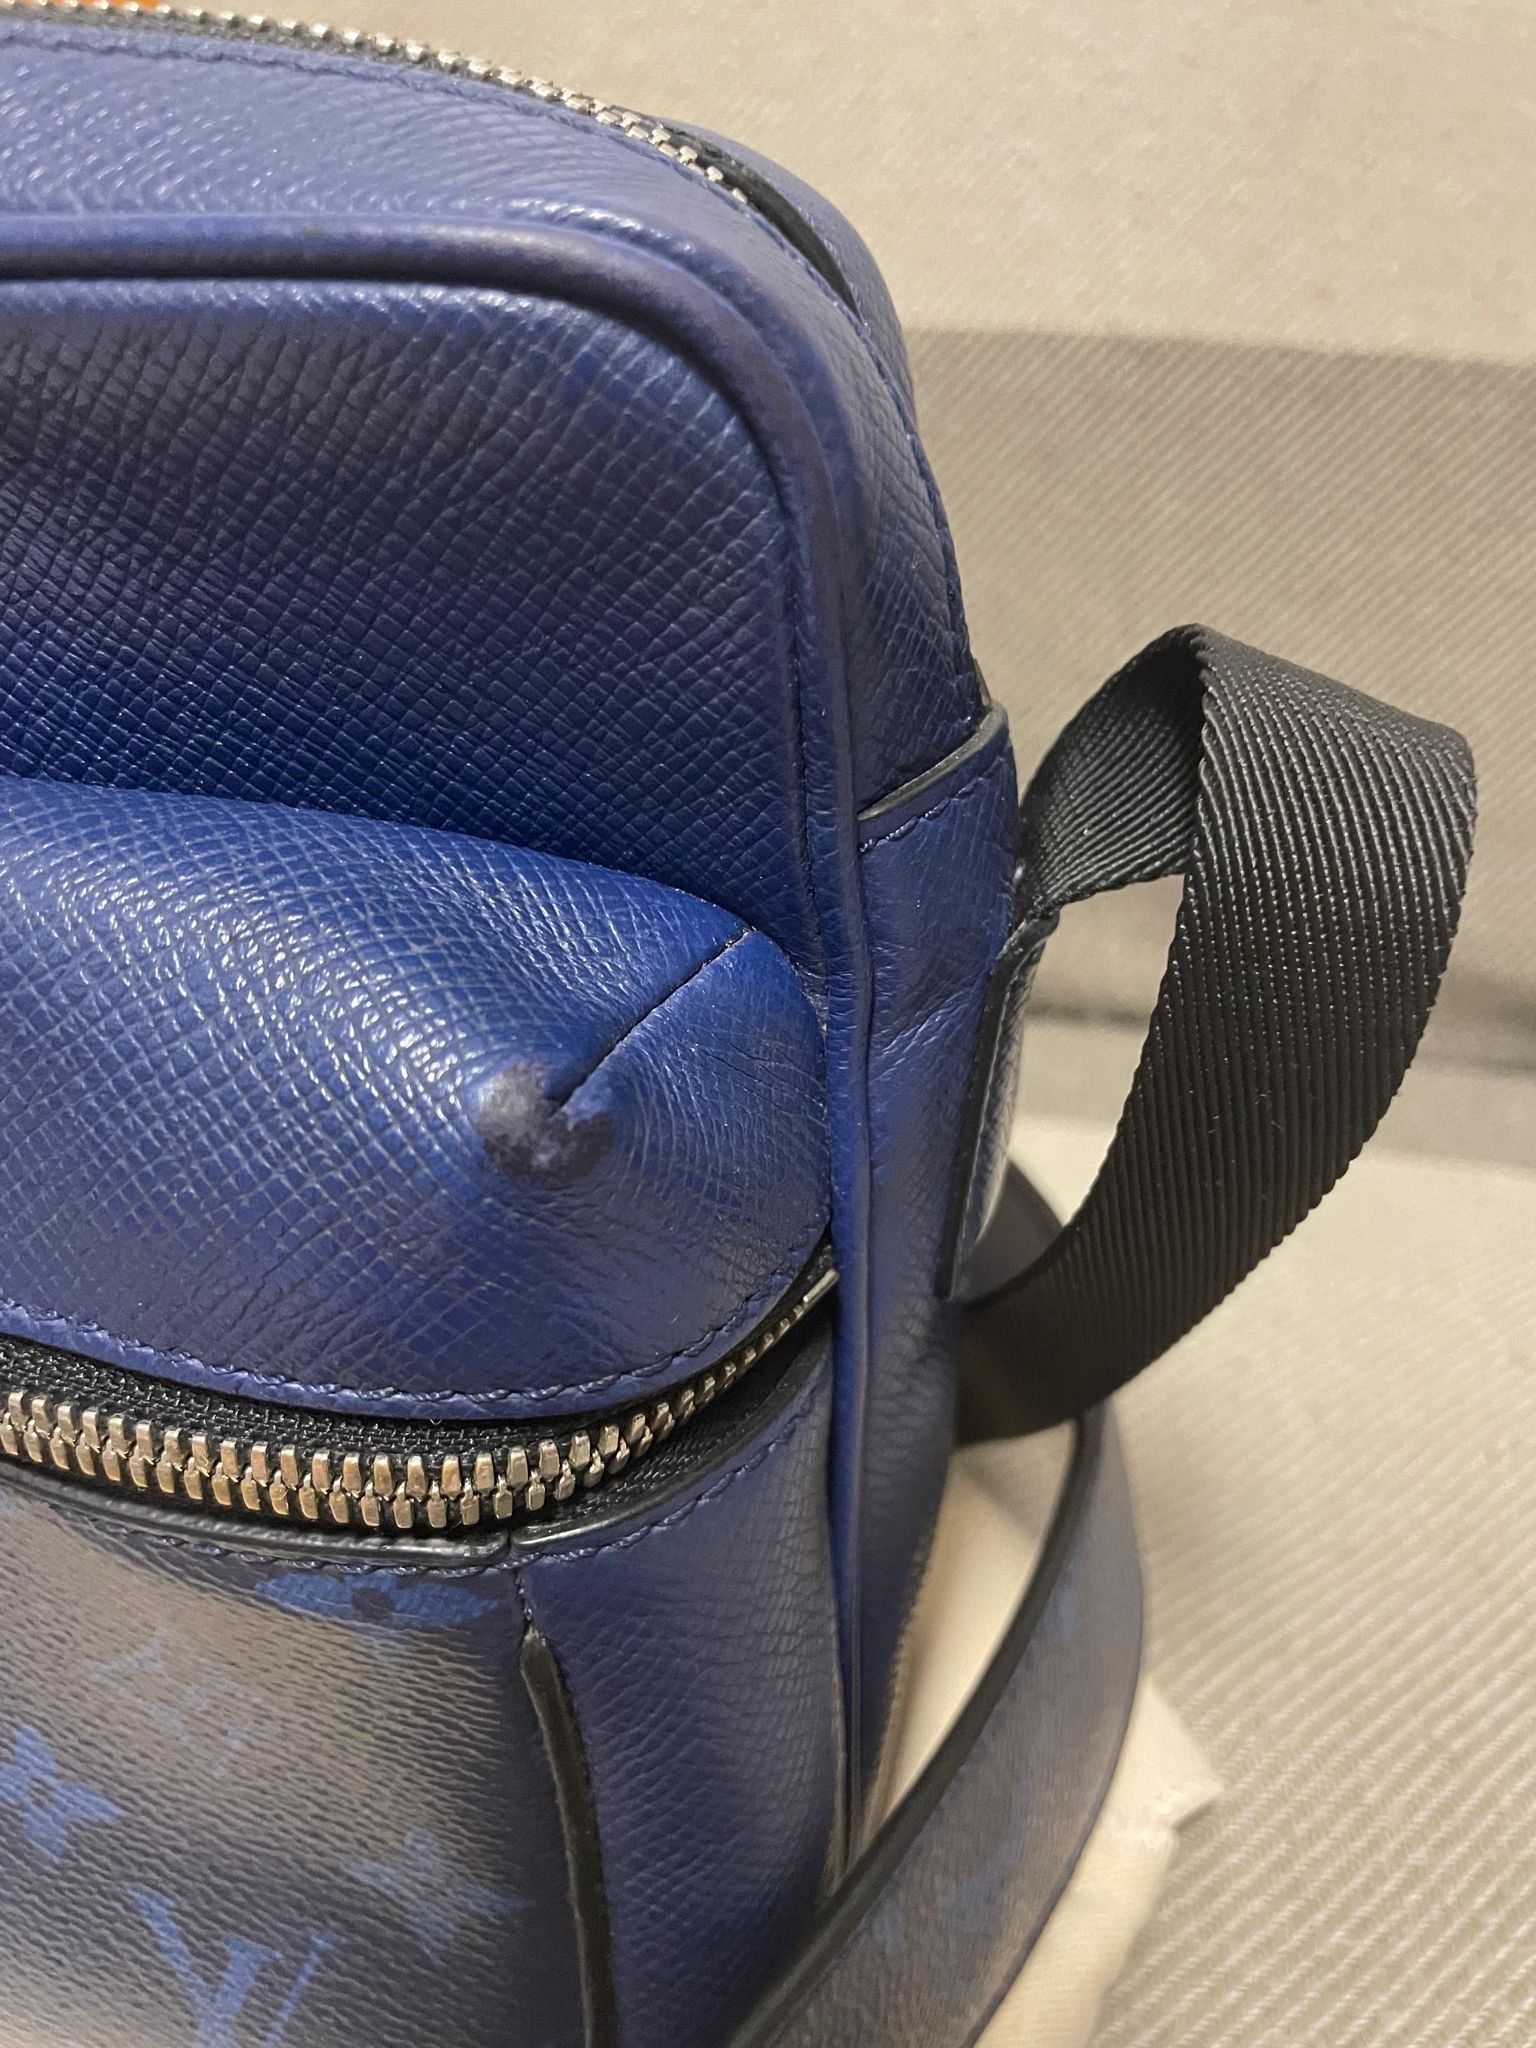 Louis Vuitton Outdoor messenger bag (1:1 Rep, TOP QUALITY, REAL MATERIAL)  Pls contact whatsapp +8618559333945 if any question or order : r/Suplookbag